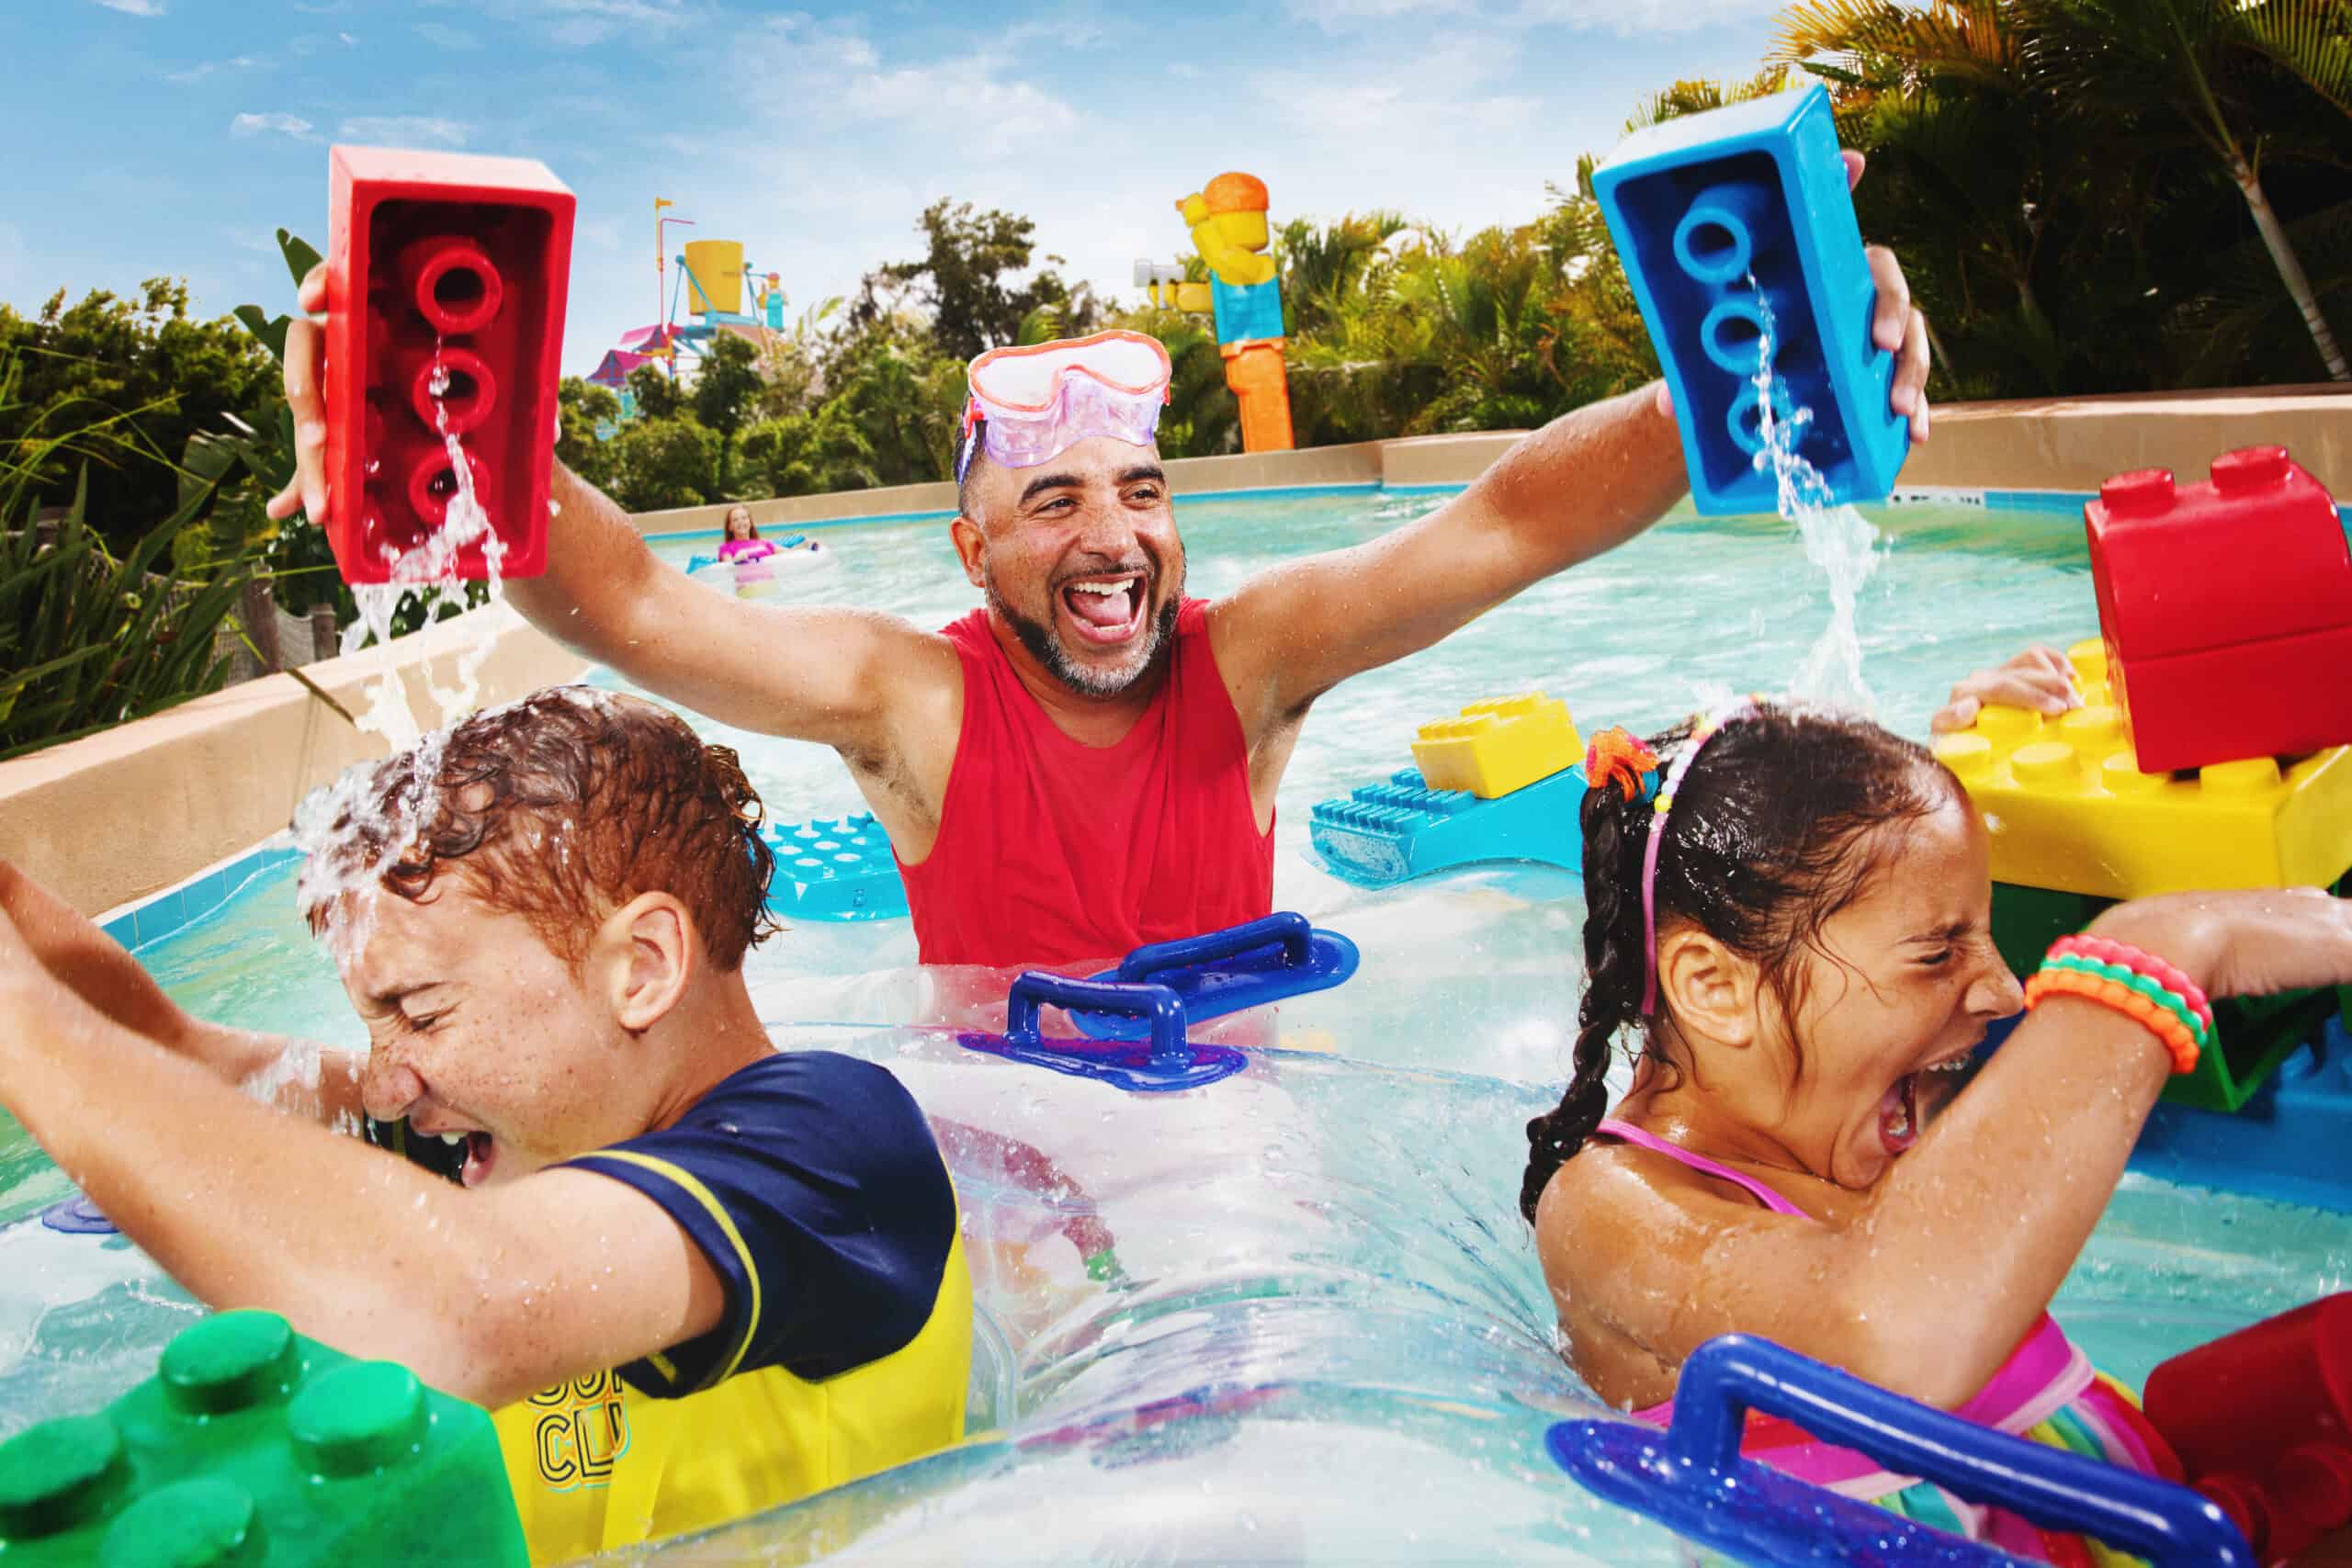 <p>Unlike Disney’s separate water parks, which require a $50 or more ticket, Legoland Florida’s water park is connected, and the additional cost is nominal, especially if you purchase it in advance.</p> <p>With over 12 waterslides for kids of all ages, a wave pool, The Joker Soaker complex for elementary-aged kids, and a lazy river to float the hours away, we spent most of our first day in the water park And in true Legoland fashion, they have water-based Lego building activities, including a boat version of Build and Test, my son’s top pick for the park’s best attraction.</p>